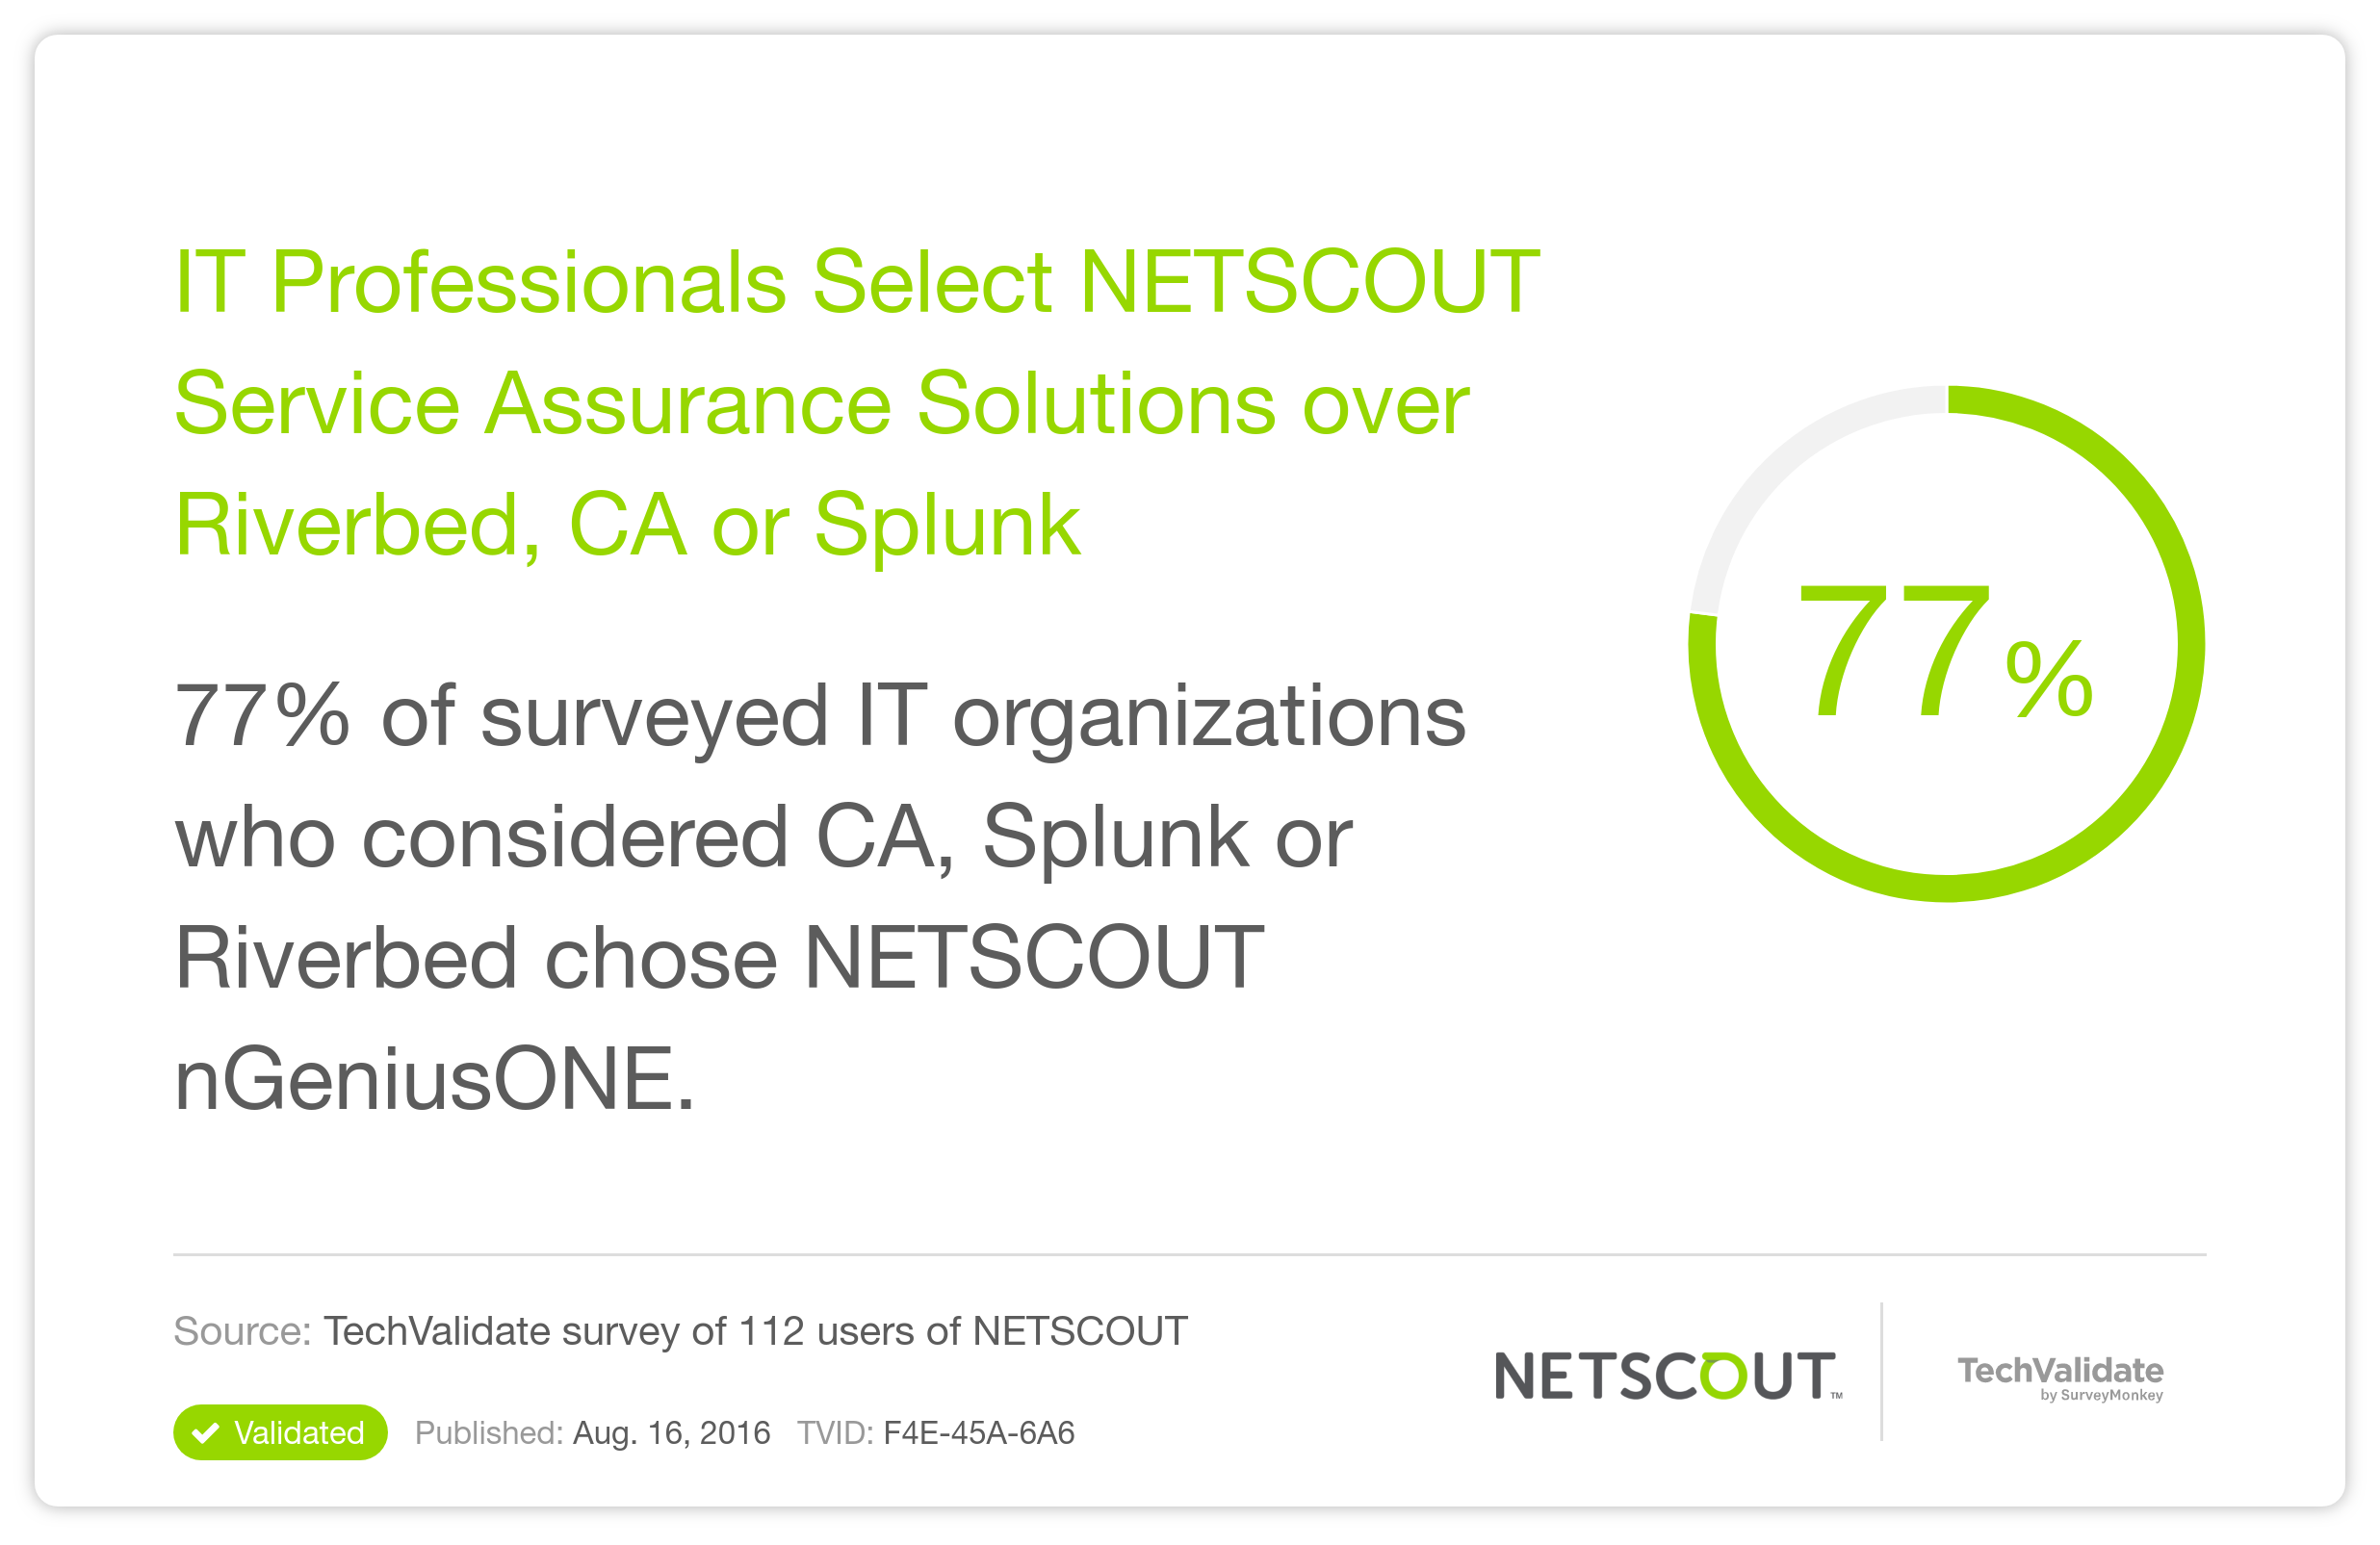 IT Professionals Select NETSCOUT Service Assurance Solutions over Riverbed, CA or Splunk